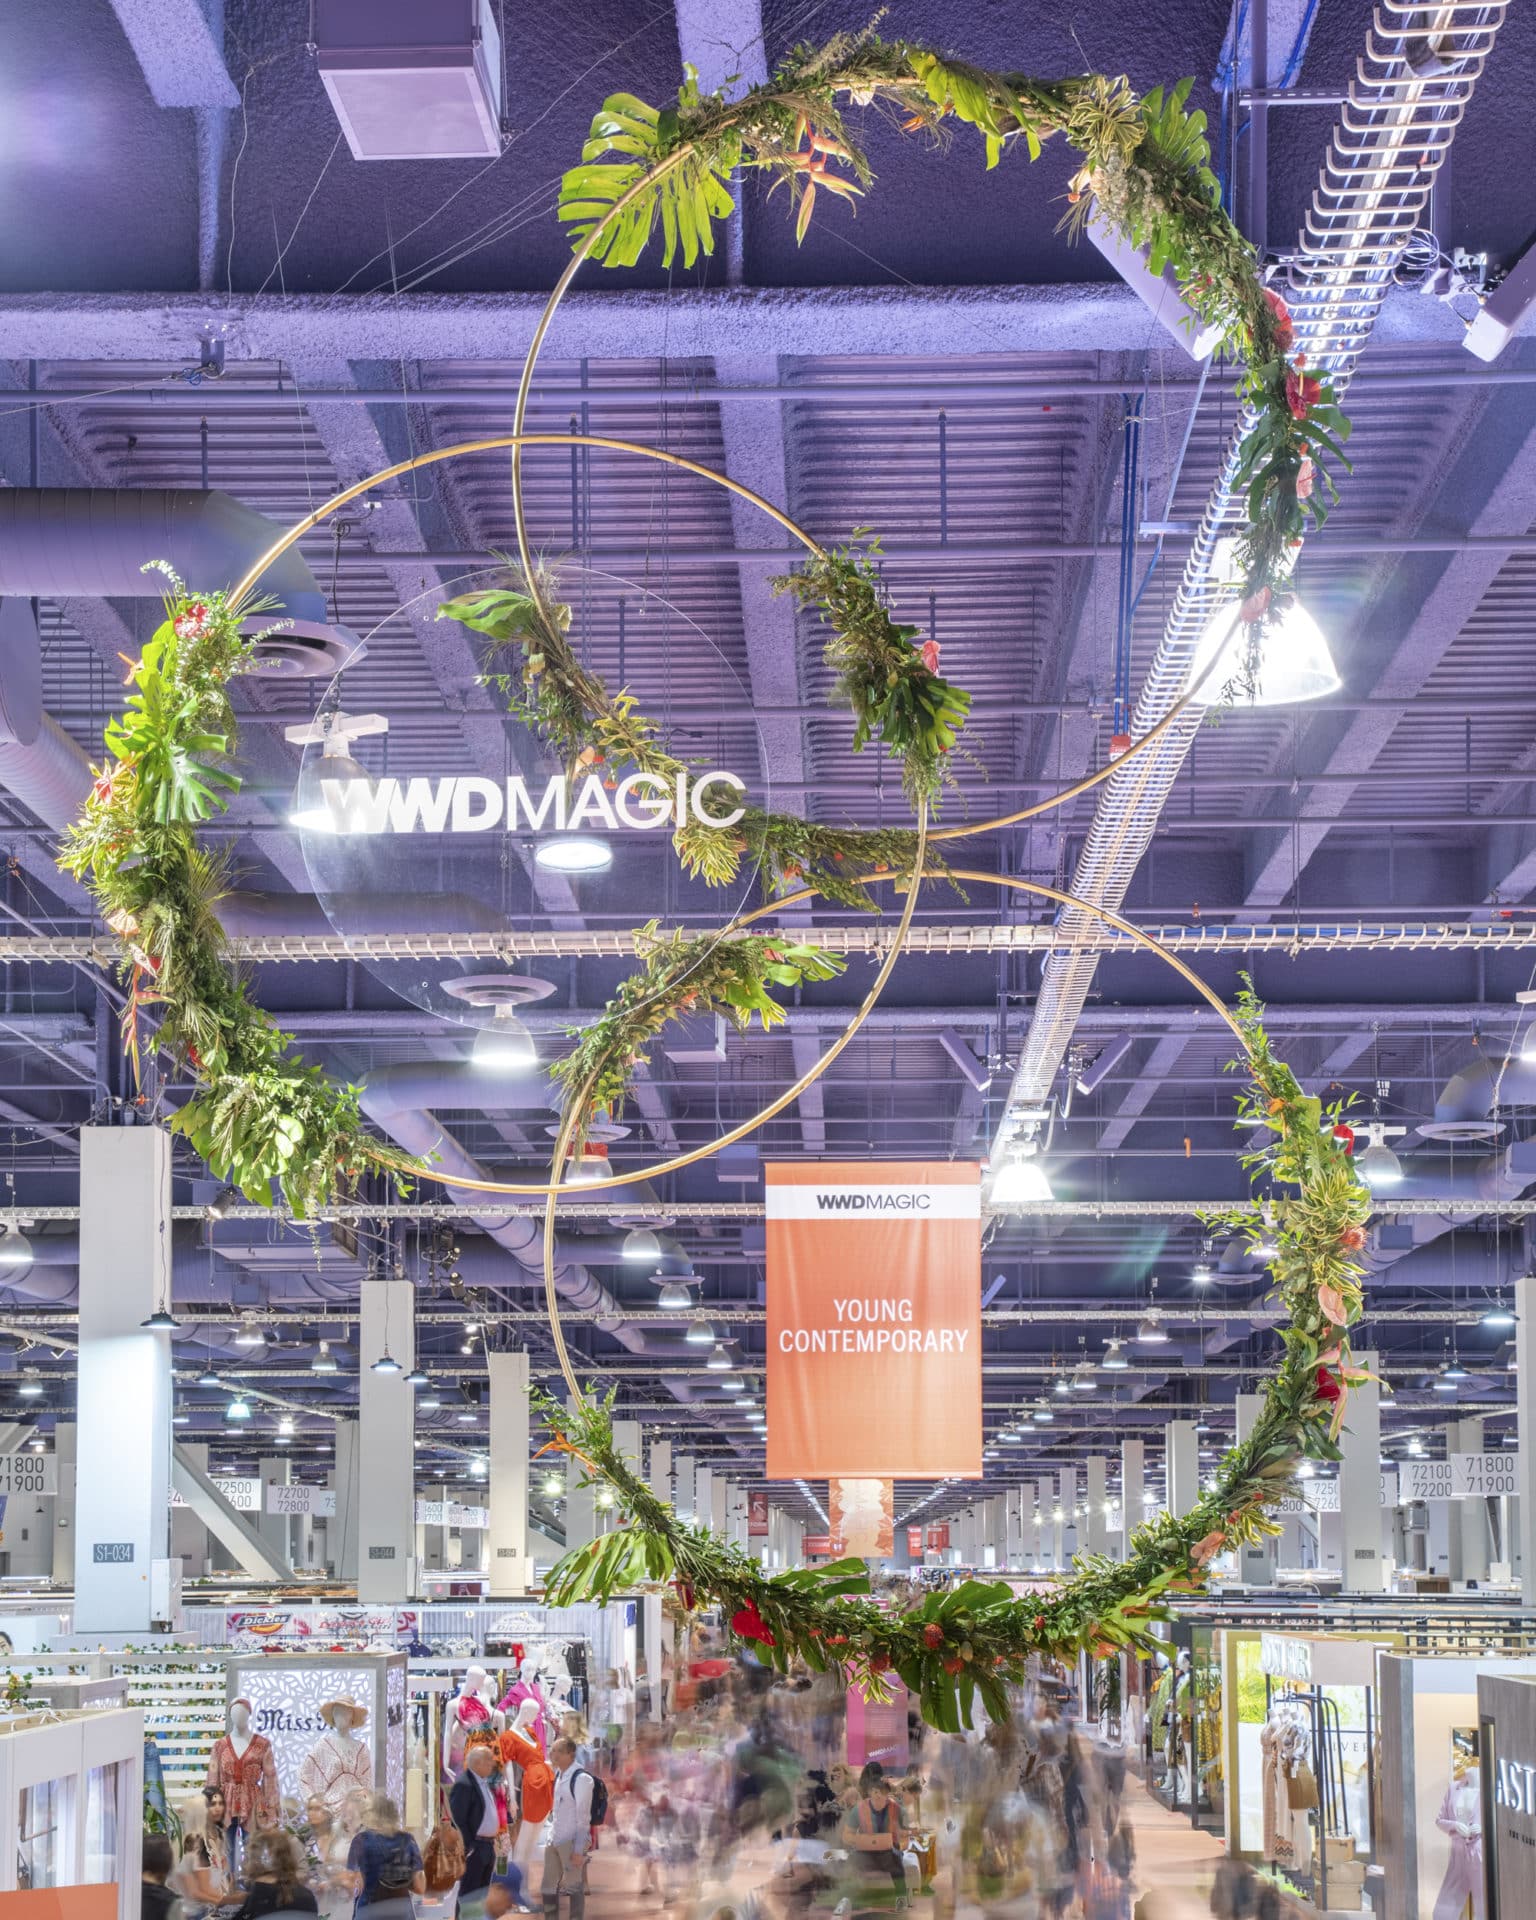 Plant rental display on circular structures hanging from the ceiling above a trade show floor.